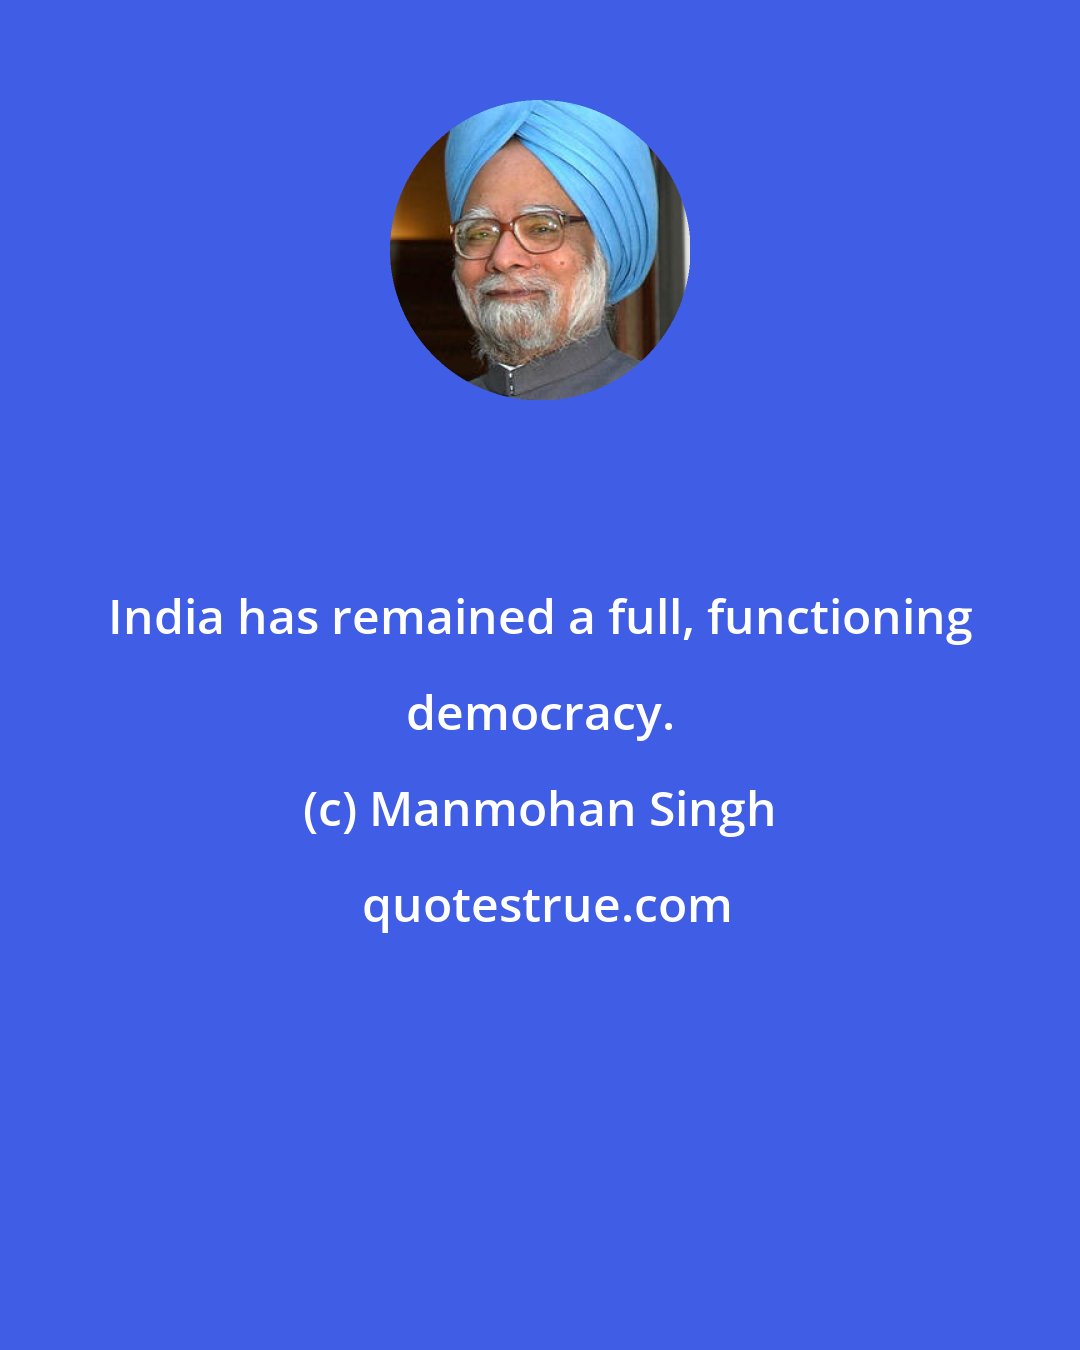 Manmohan Singh: India has remained a full, functioning democracy.